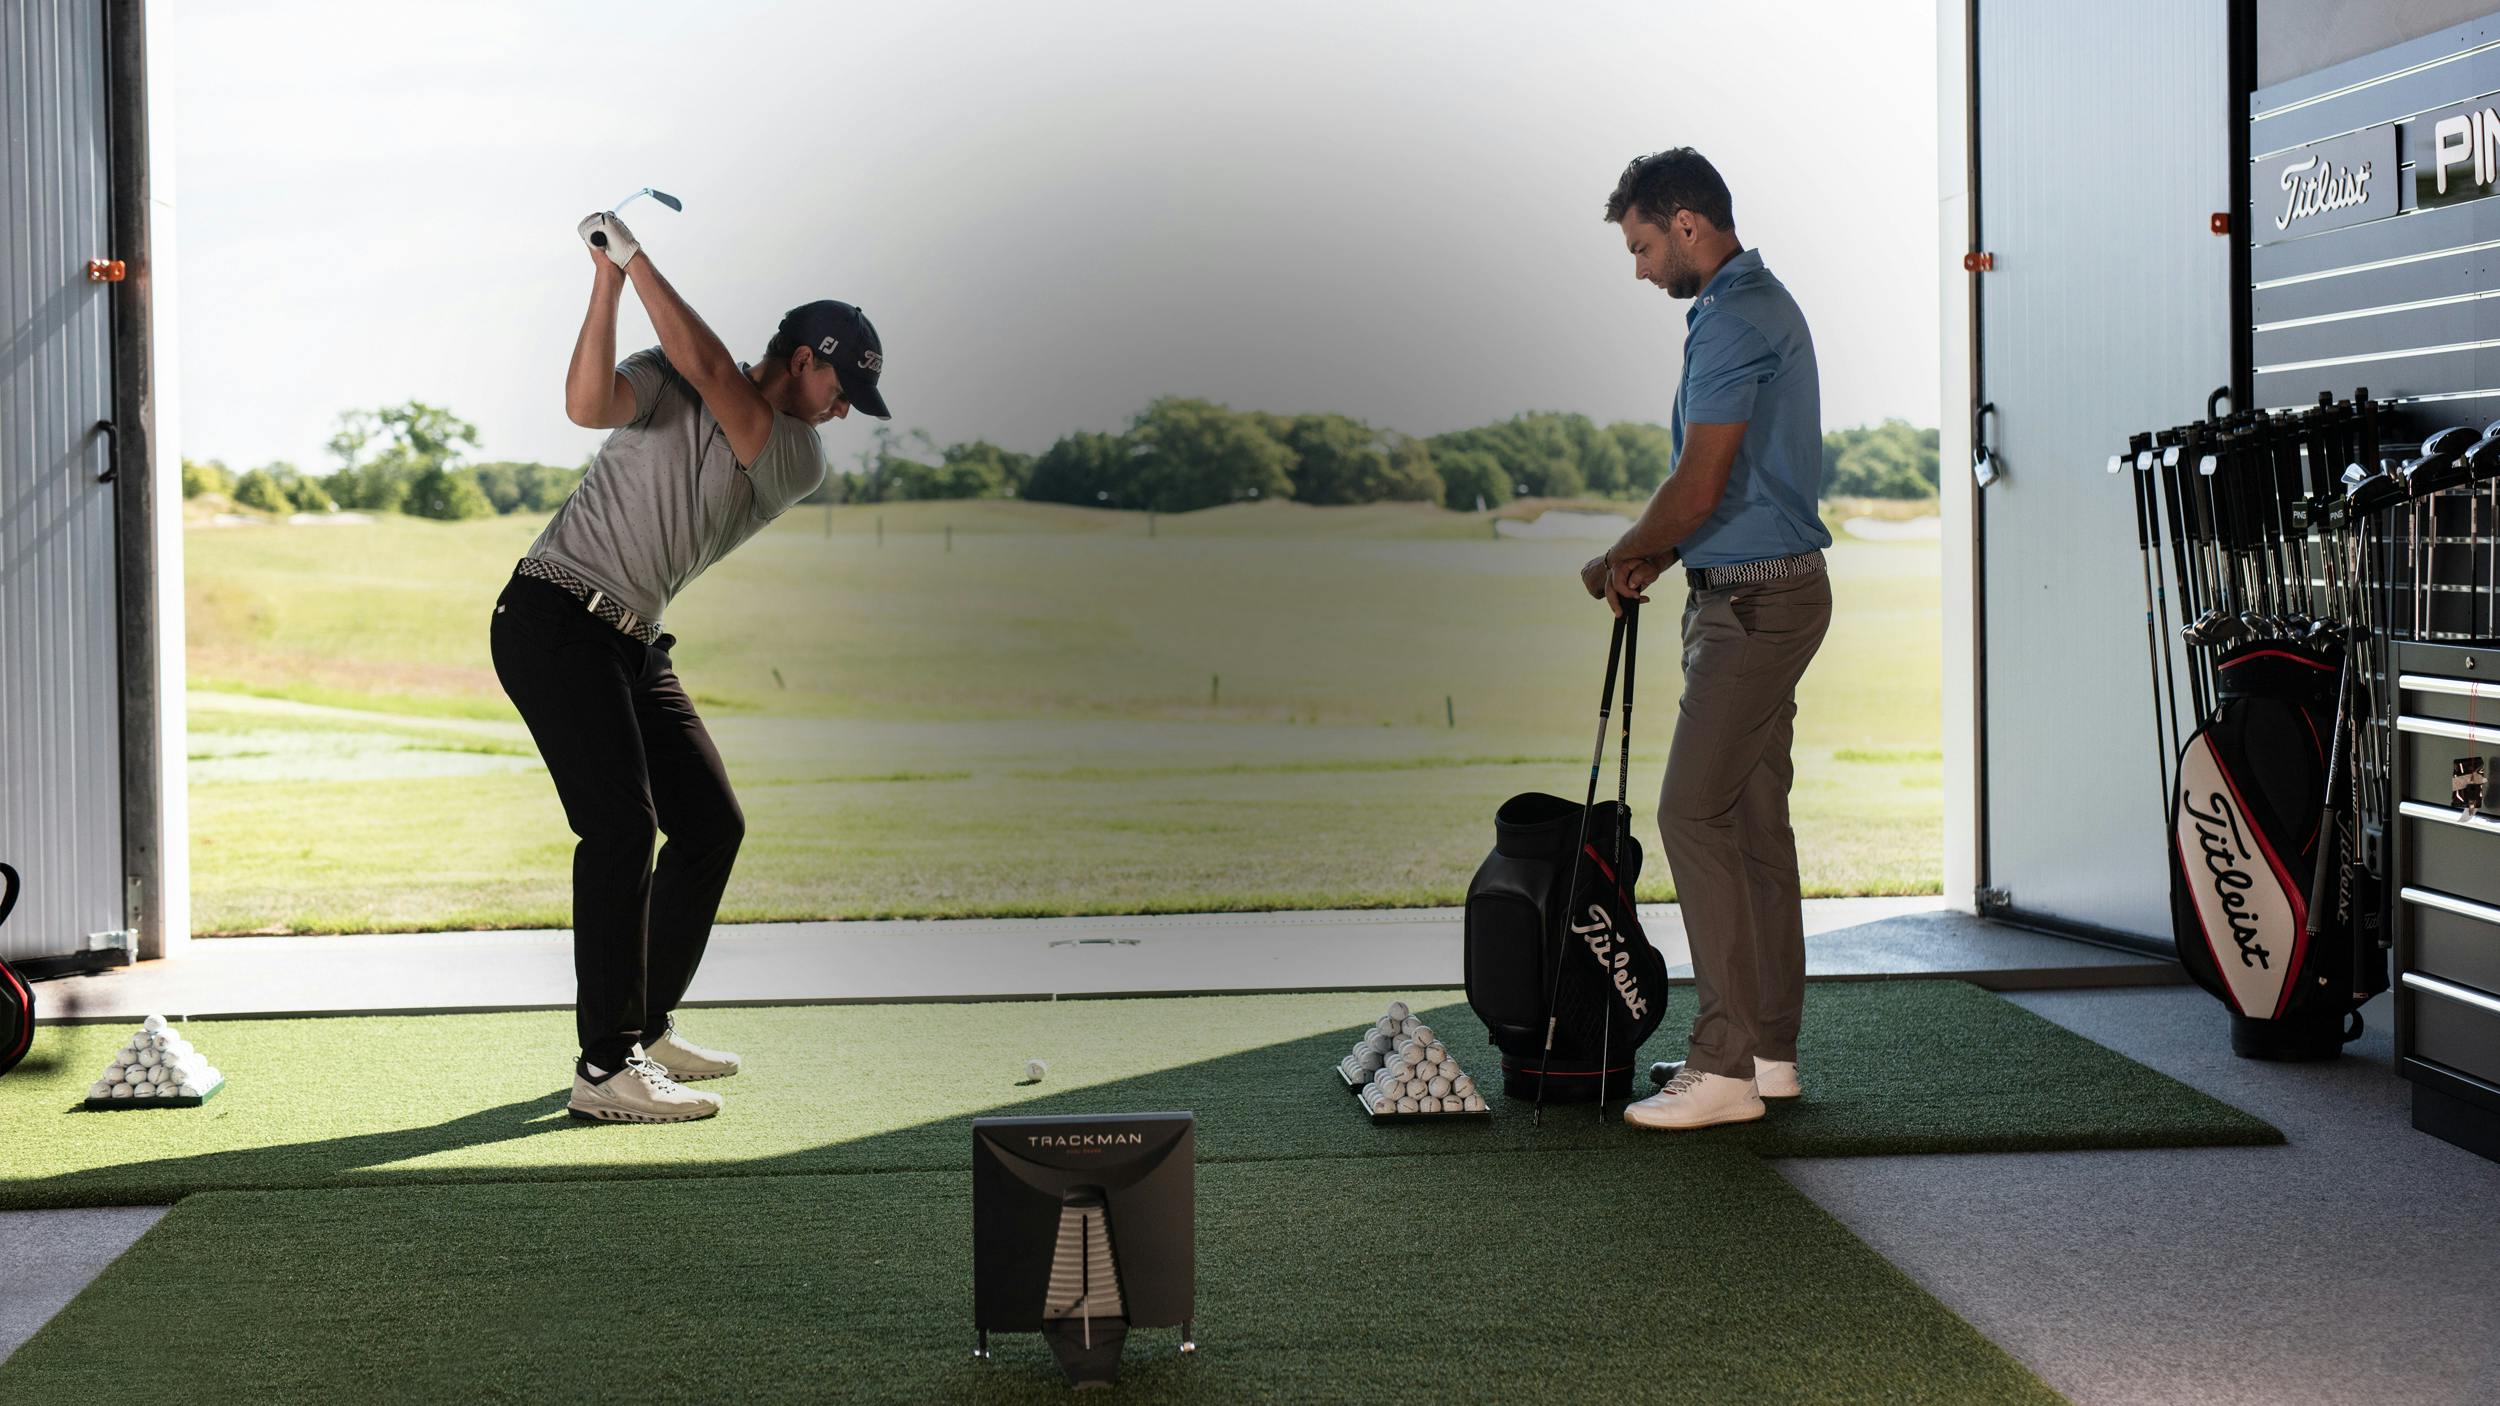 The_power_of_two_is_better_n_trackman_4_golf